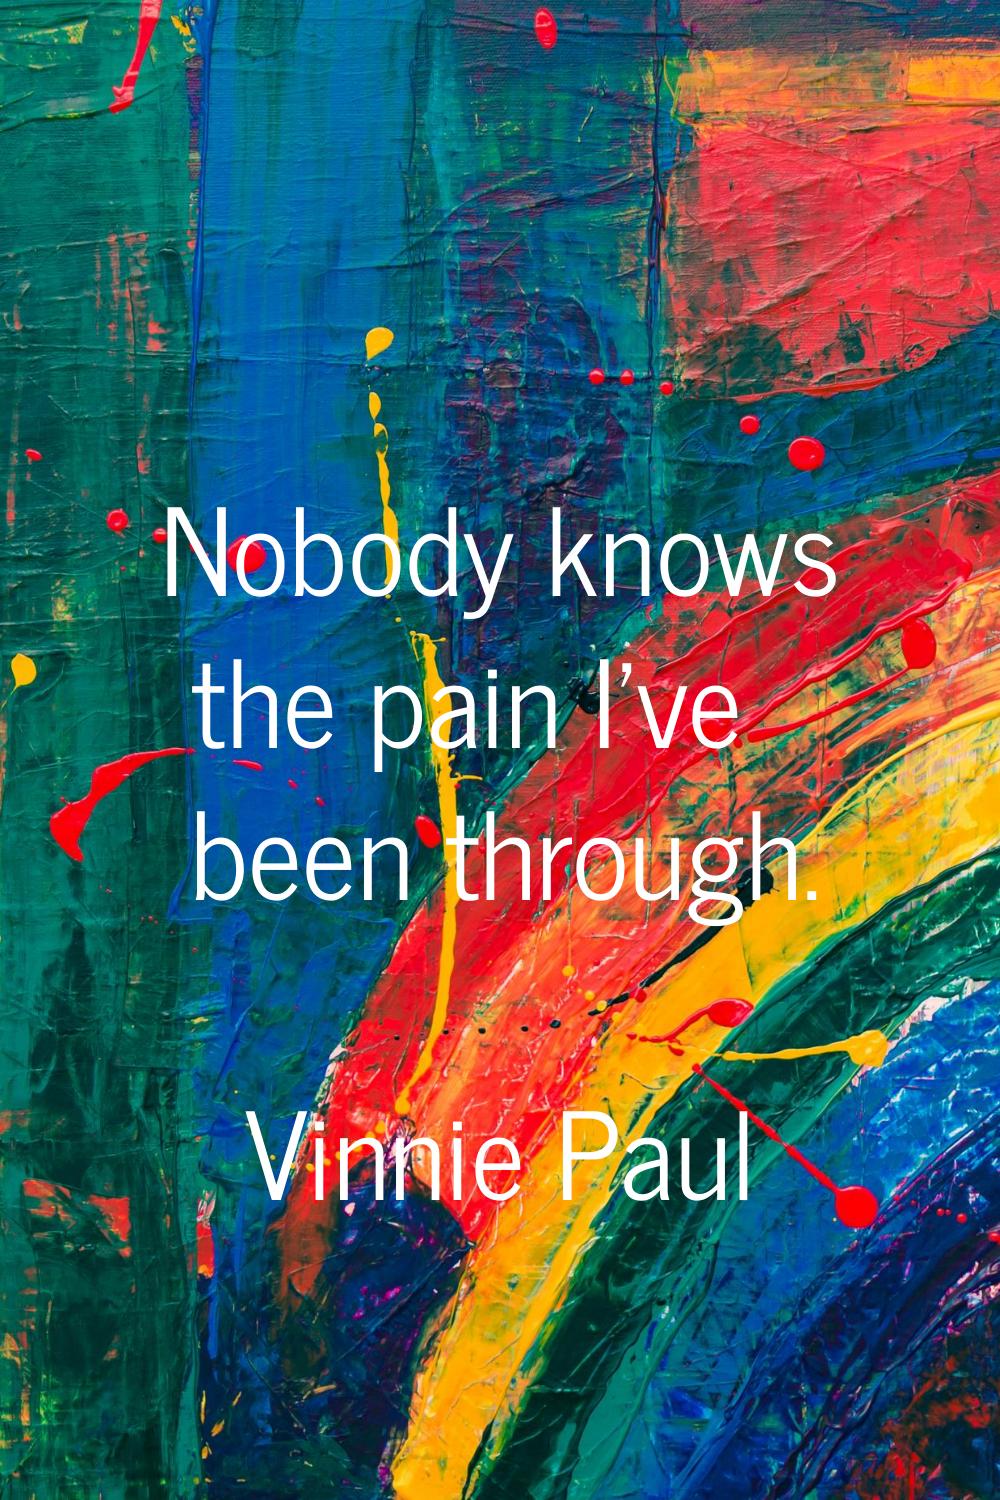 Nobody knows the pain I've been through.